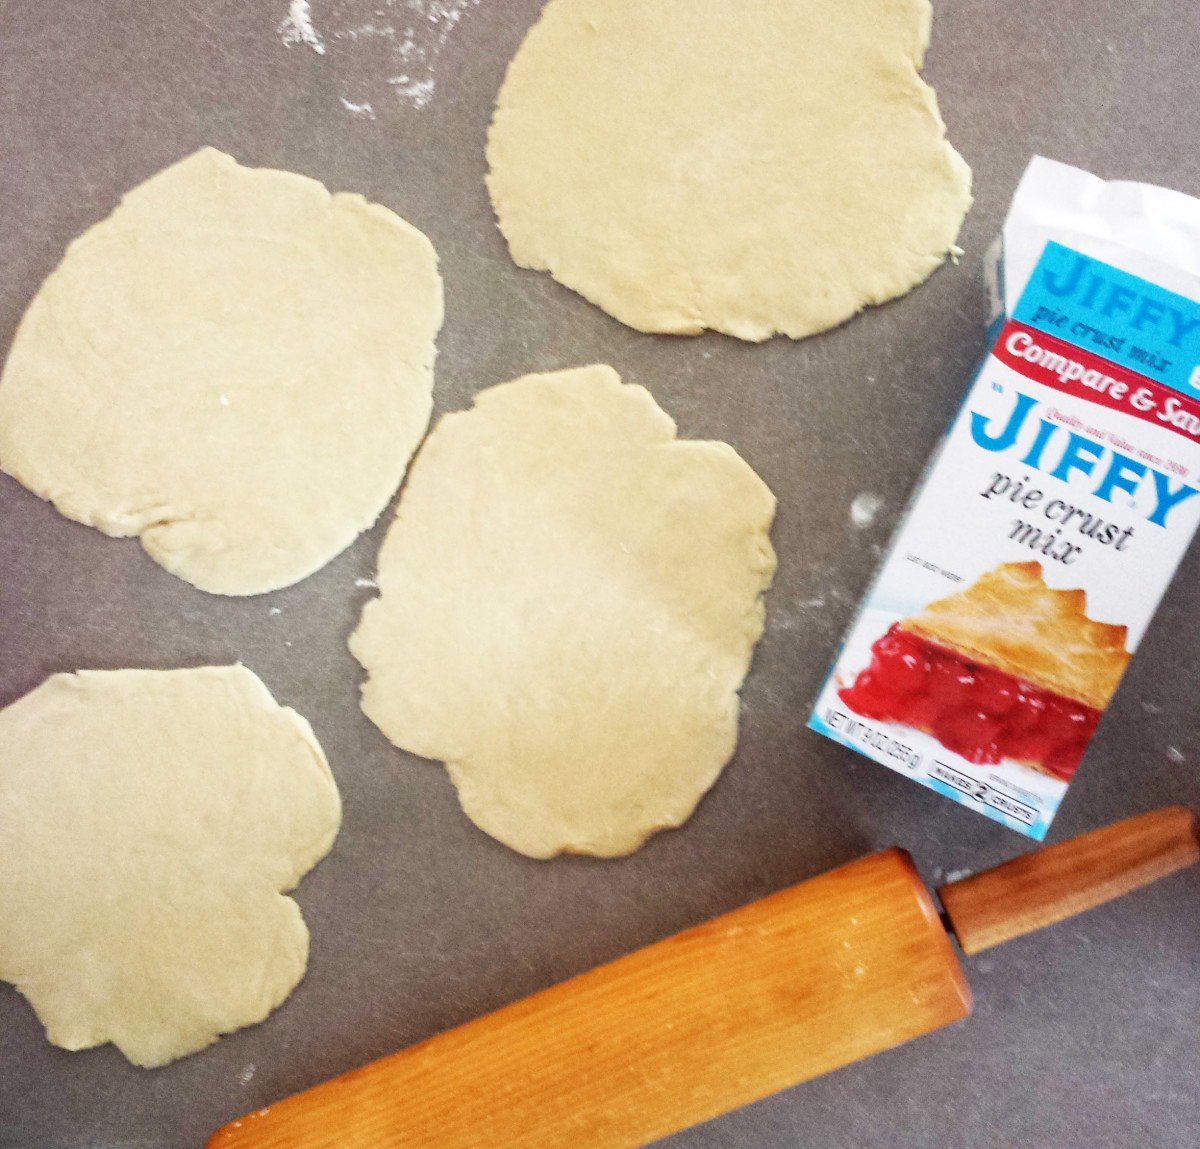 Prepare the pie crust mix according to package instructions, then roll dough out into 4 circles.